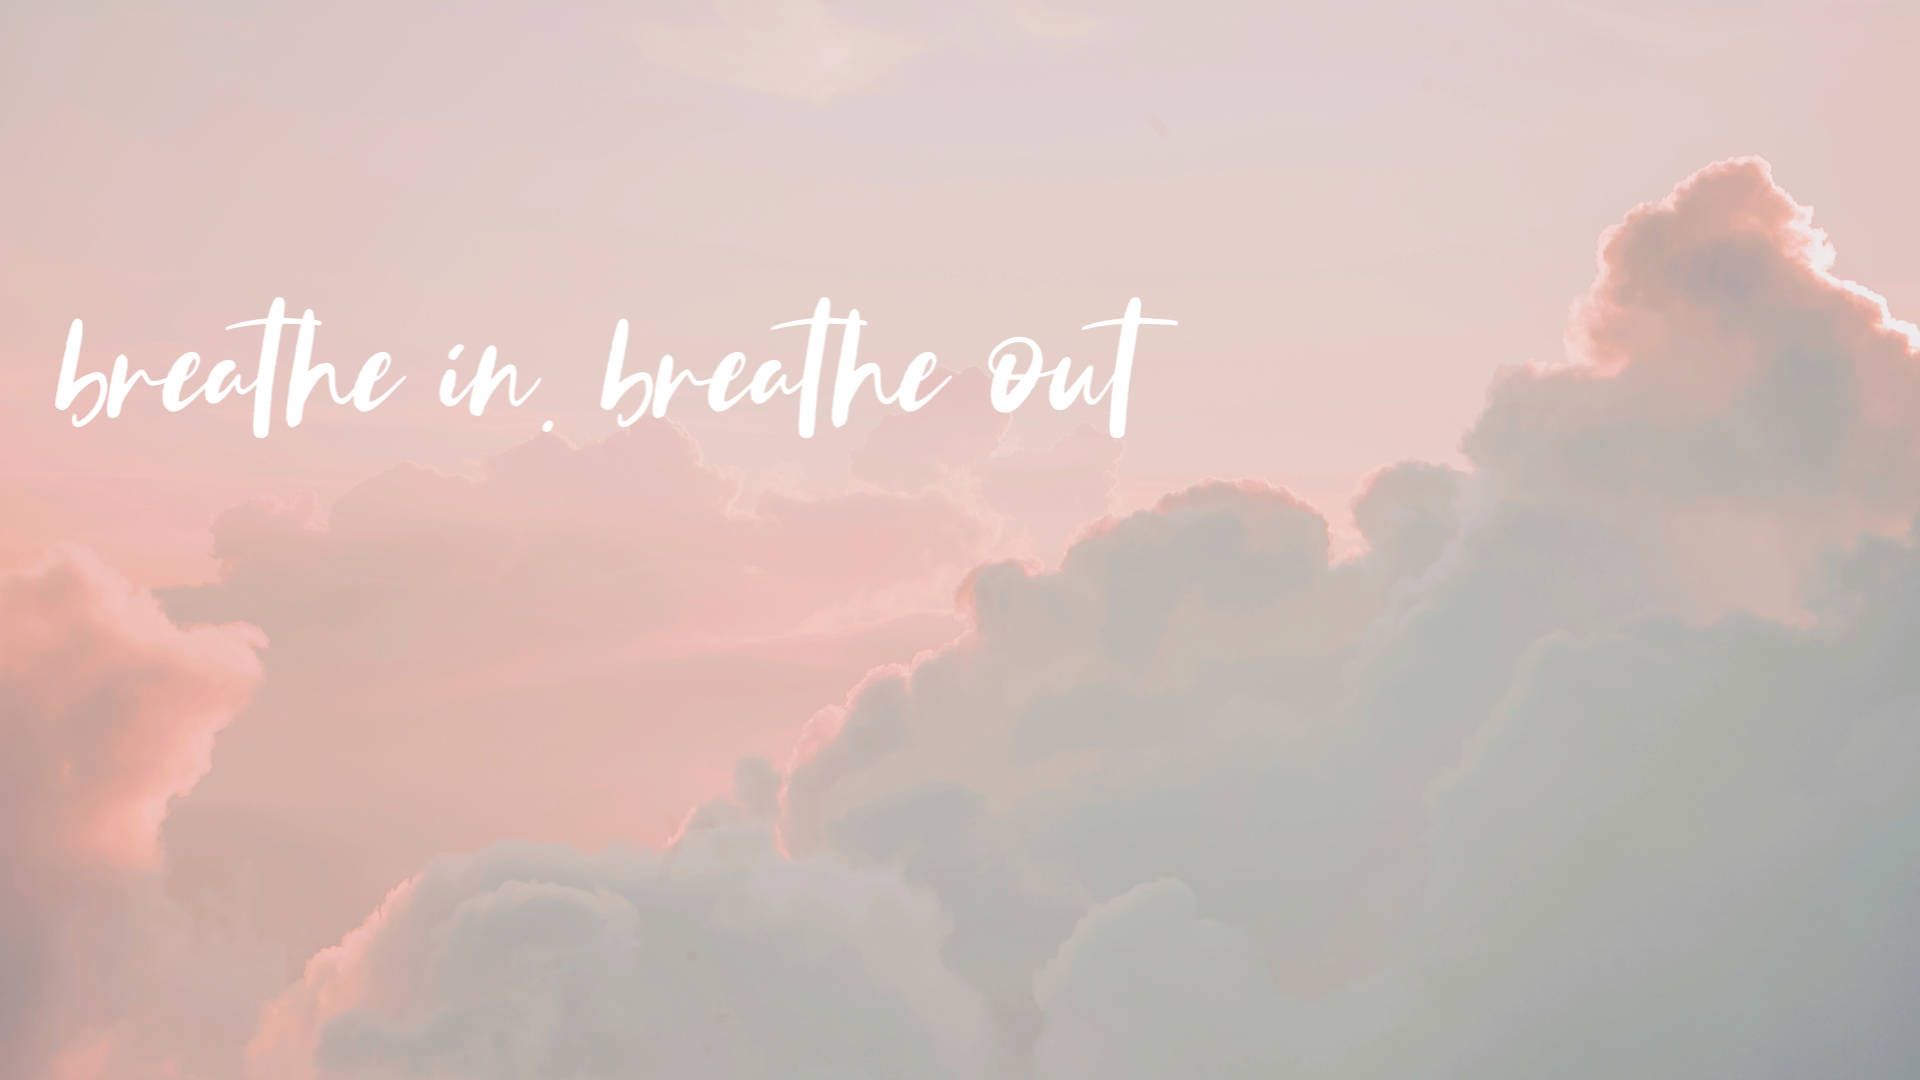 Download Breathe In Breathe Out Pastel Aesthetic Tumblr Laptop Wallpaper